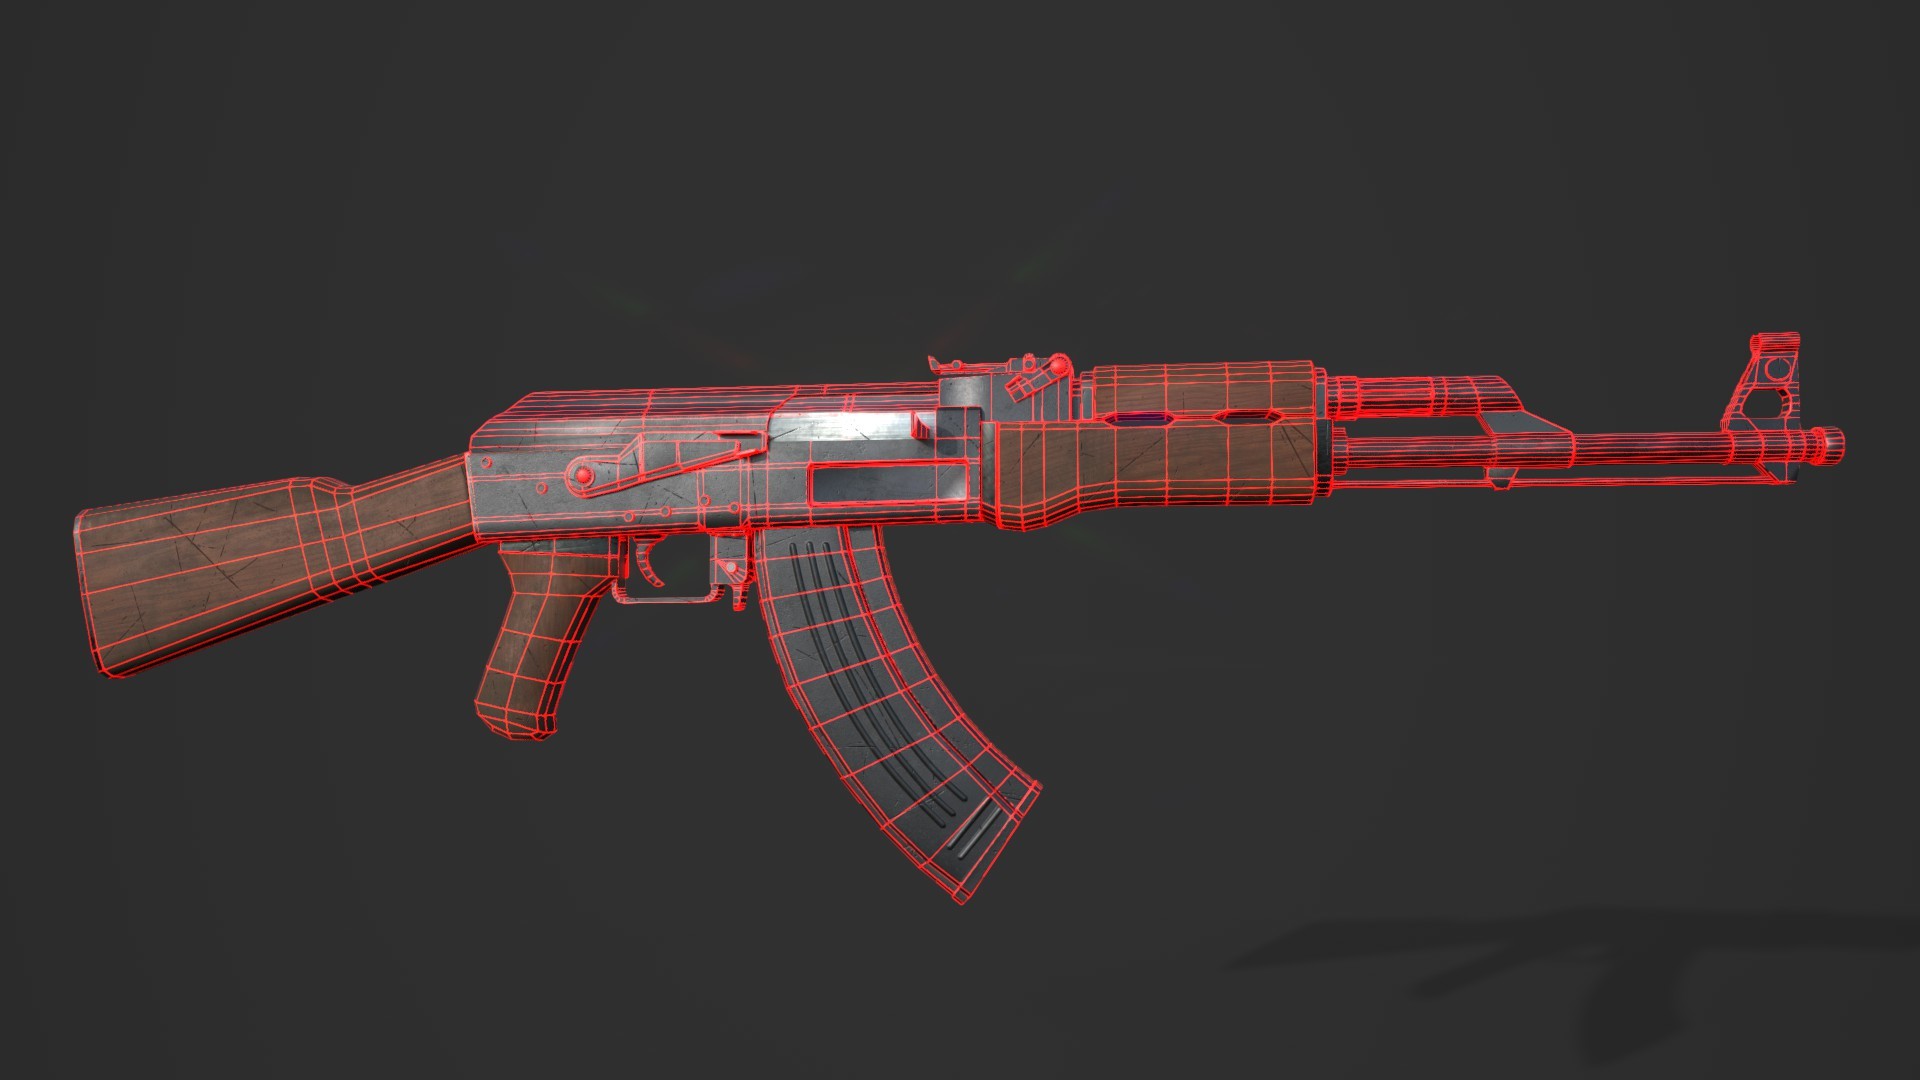 arkodigital❄️ on X: Check out the new skin collection from @okGRAPHS and I  : The Designer Collection. We're releasing the AK-47 first since it's the  basis for the whole concept. We took